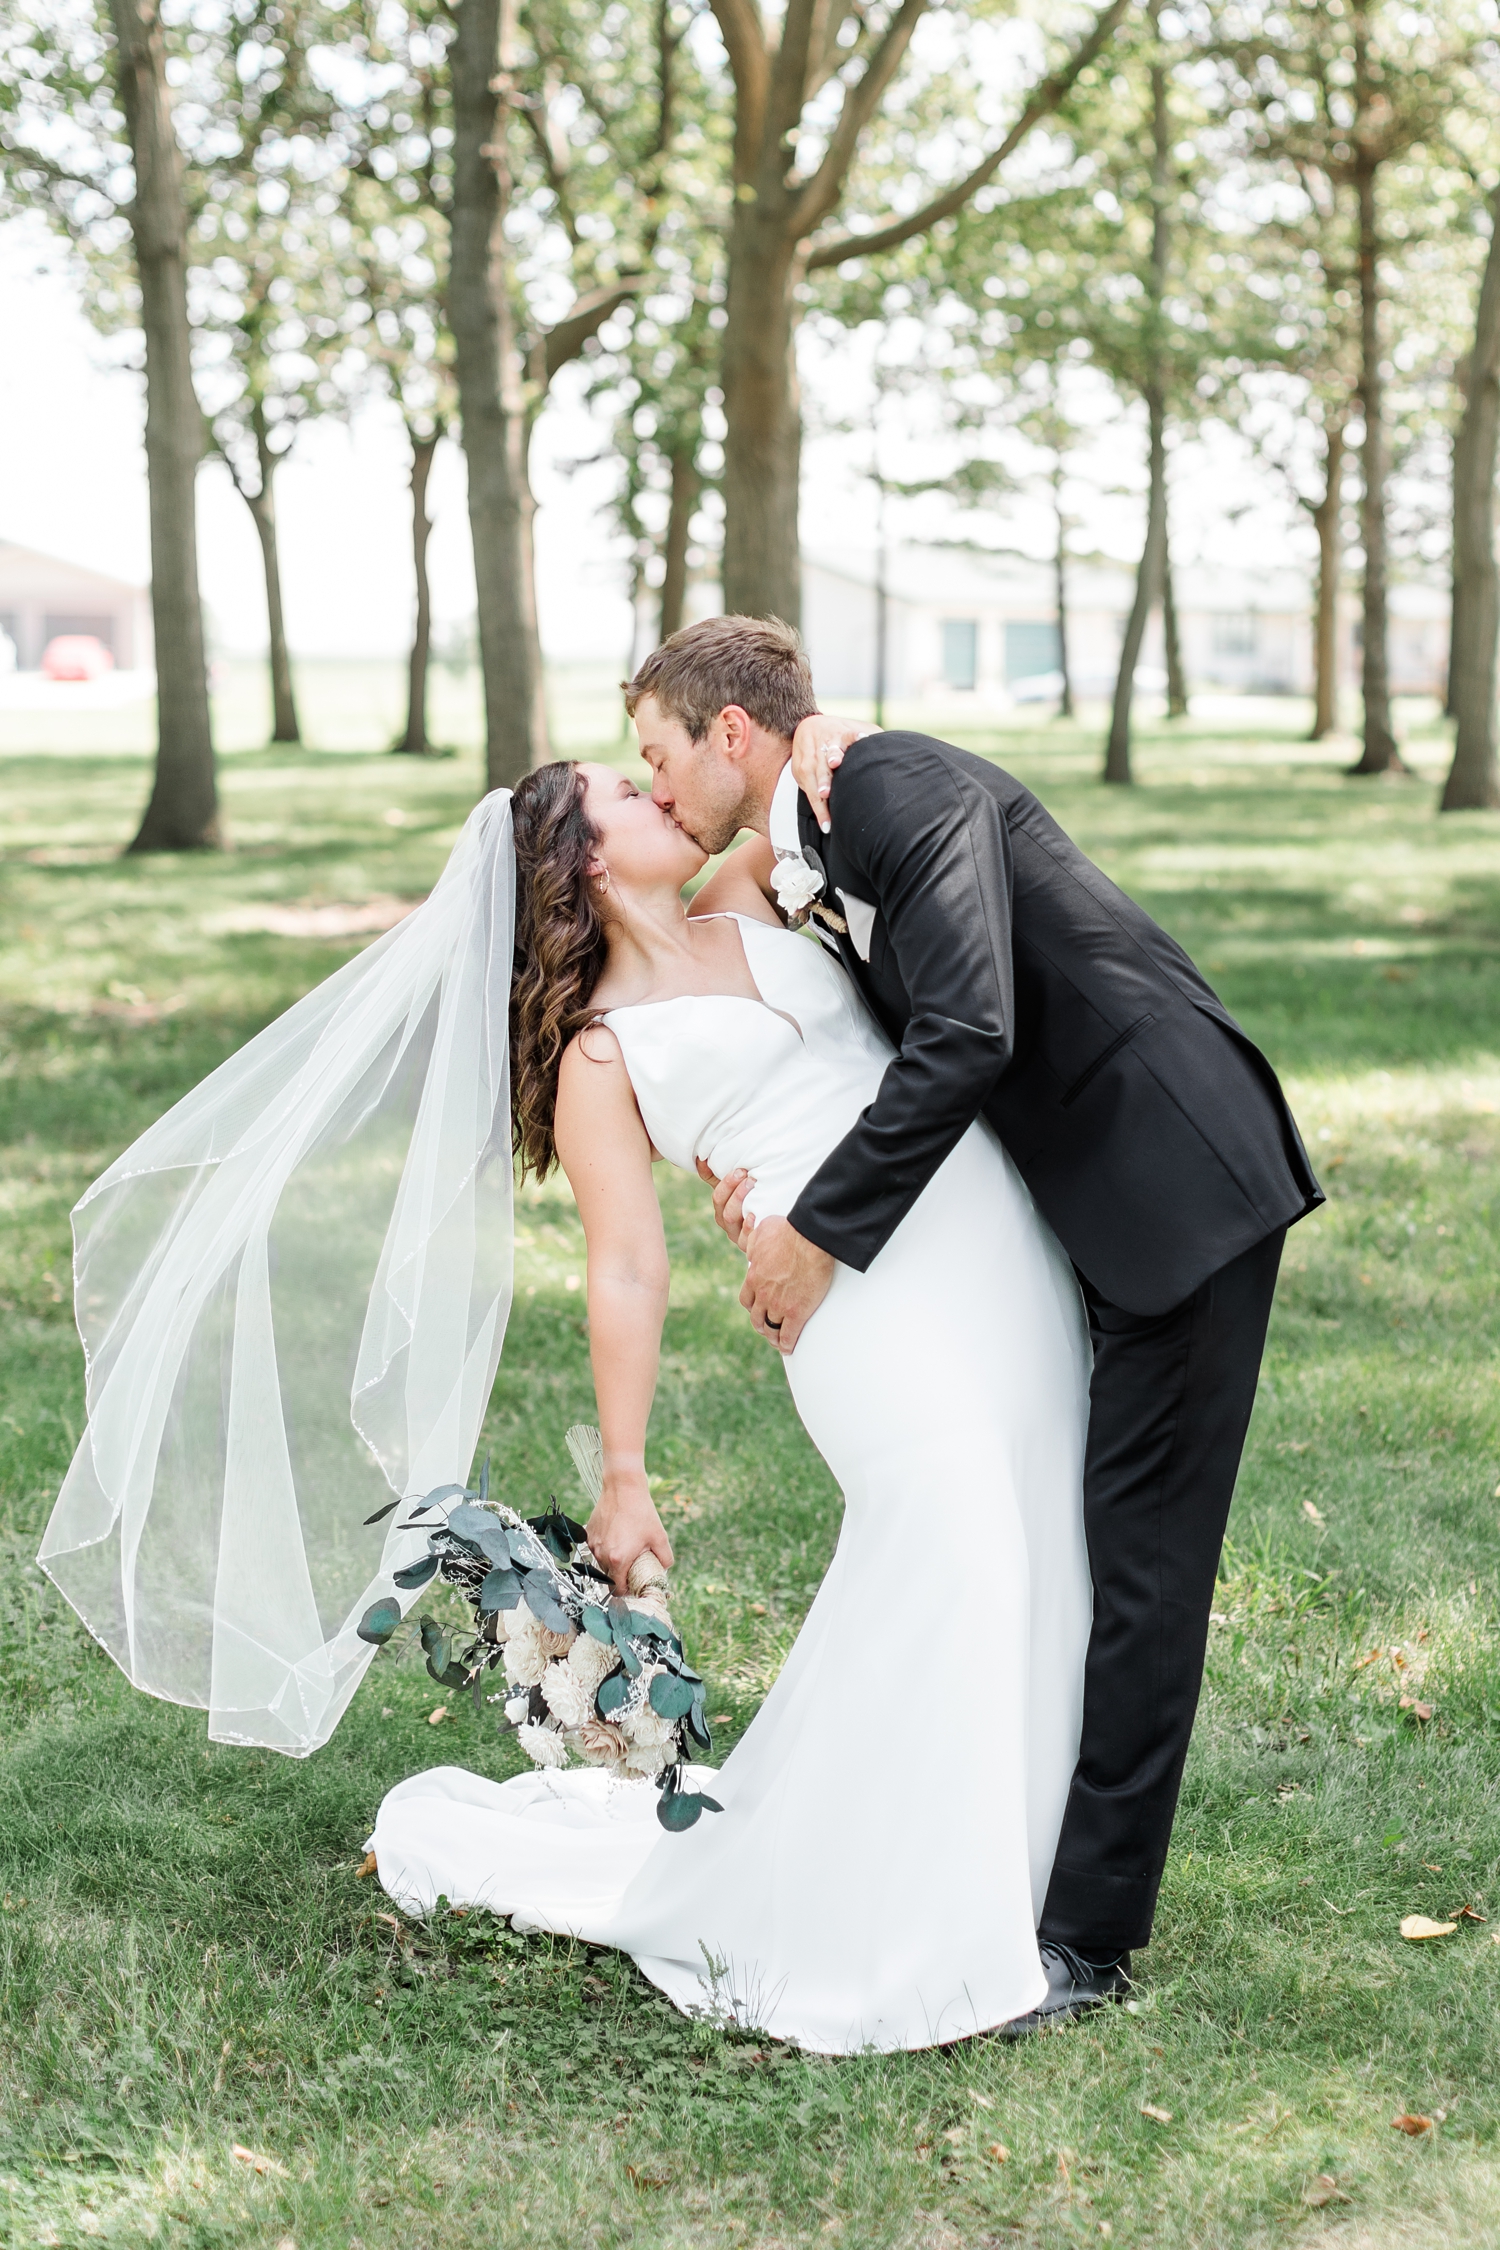 Grant dips his bride Alyssa for a kiss at 5 Island Campground in Emmetsburg, IA | CB Studio